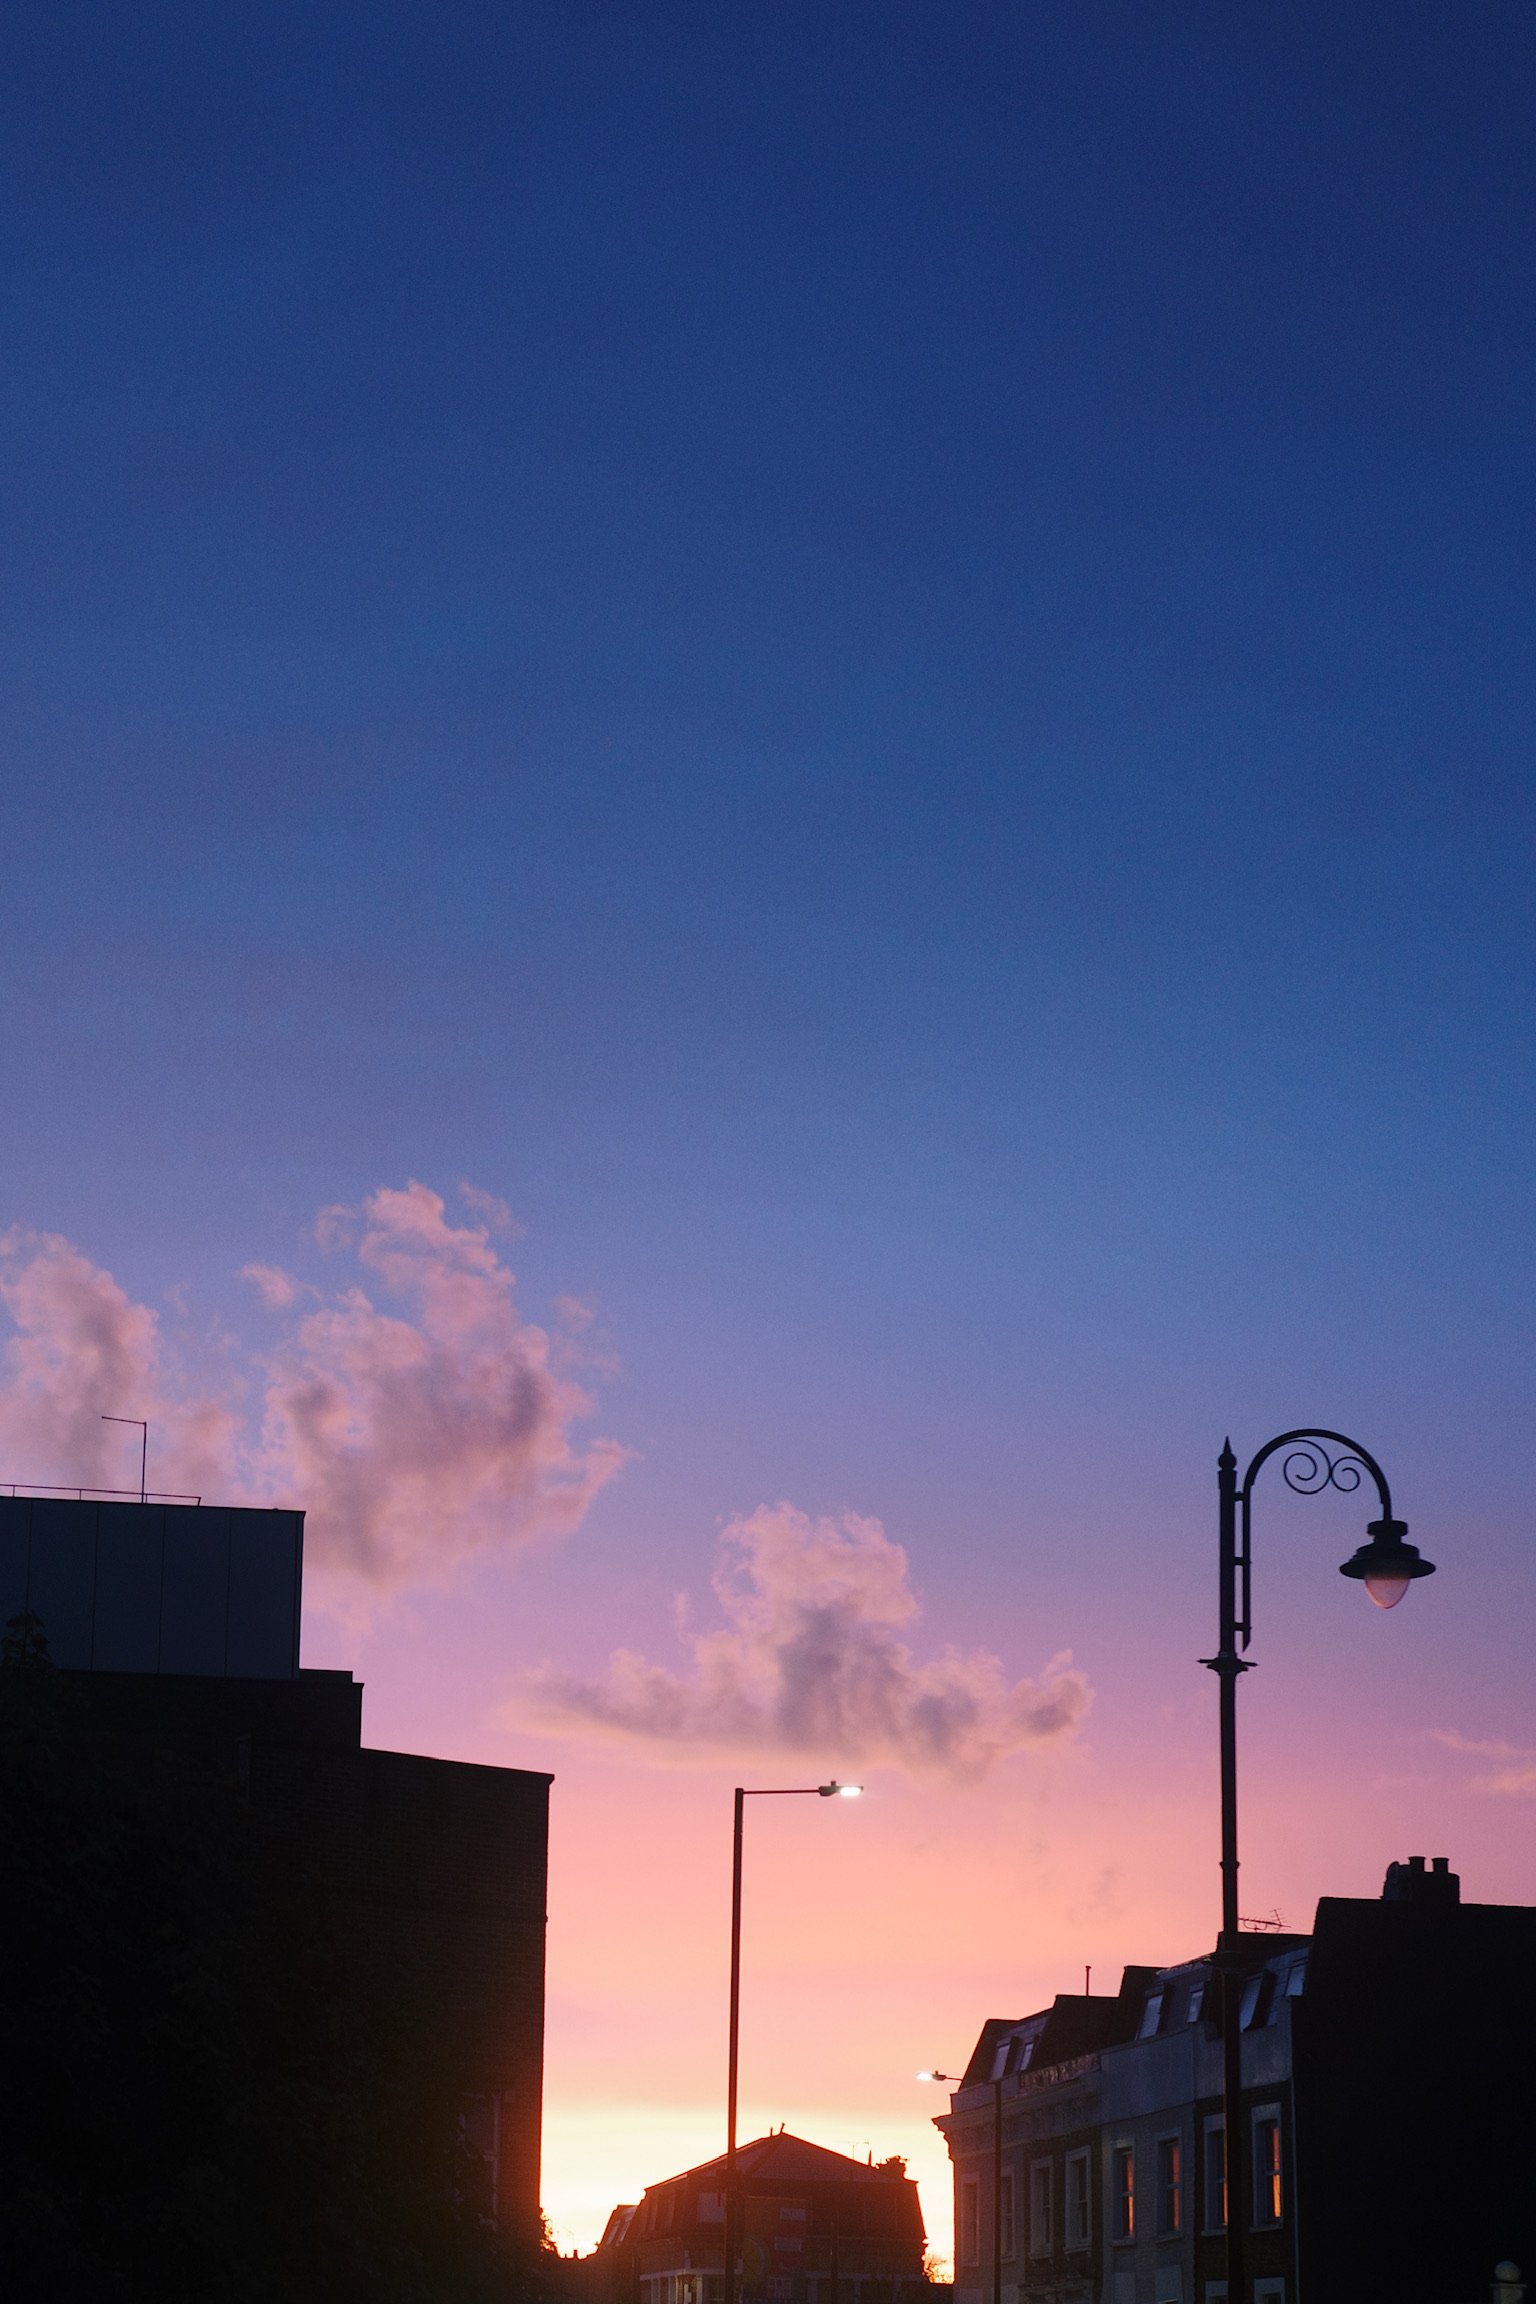 sunset in london, pink to purple gradient, street lamps in a distance.